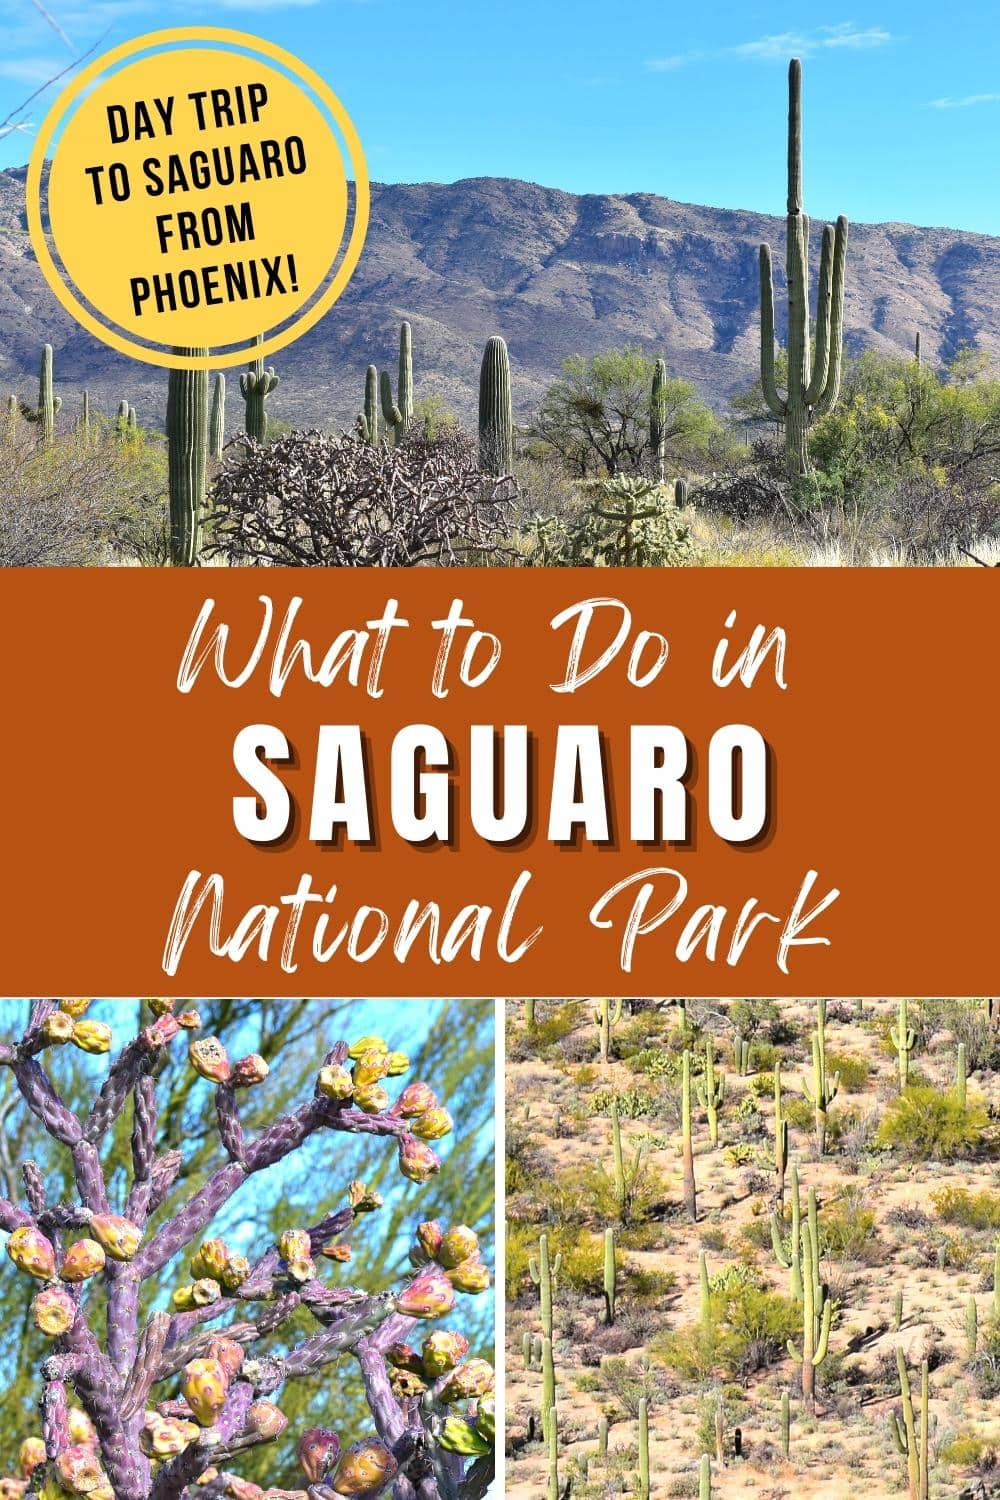 14 Awesome Things to Do in Saguaro National Park